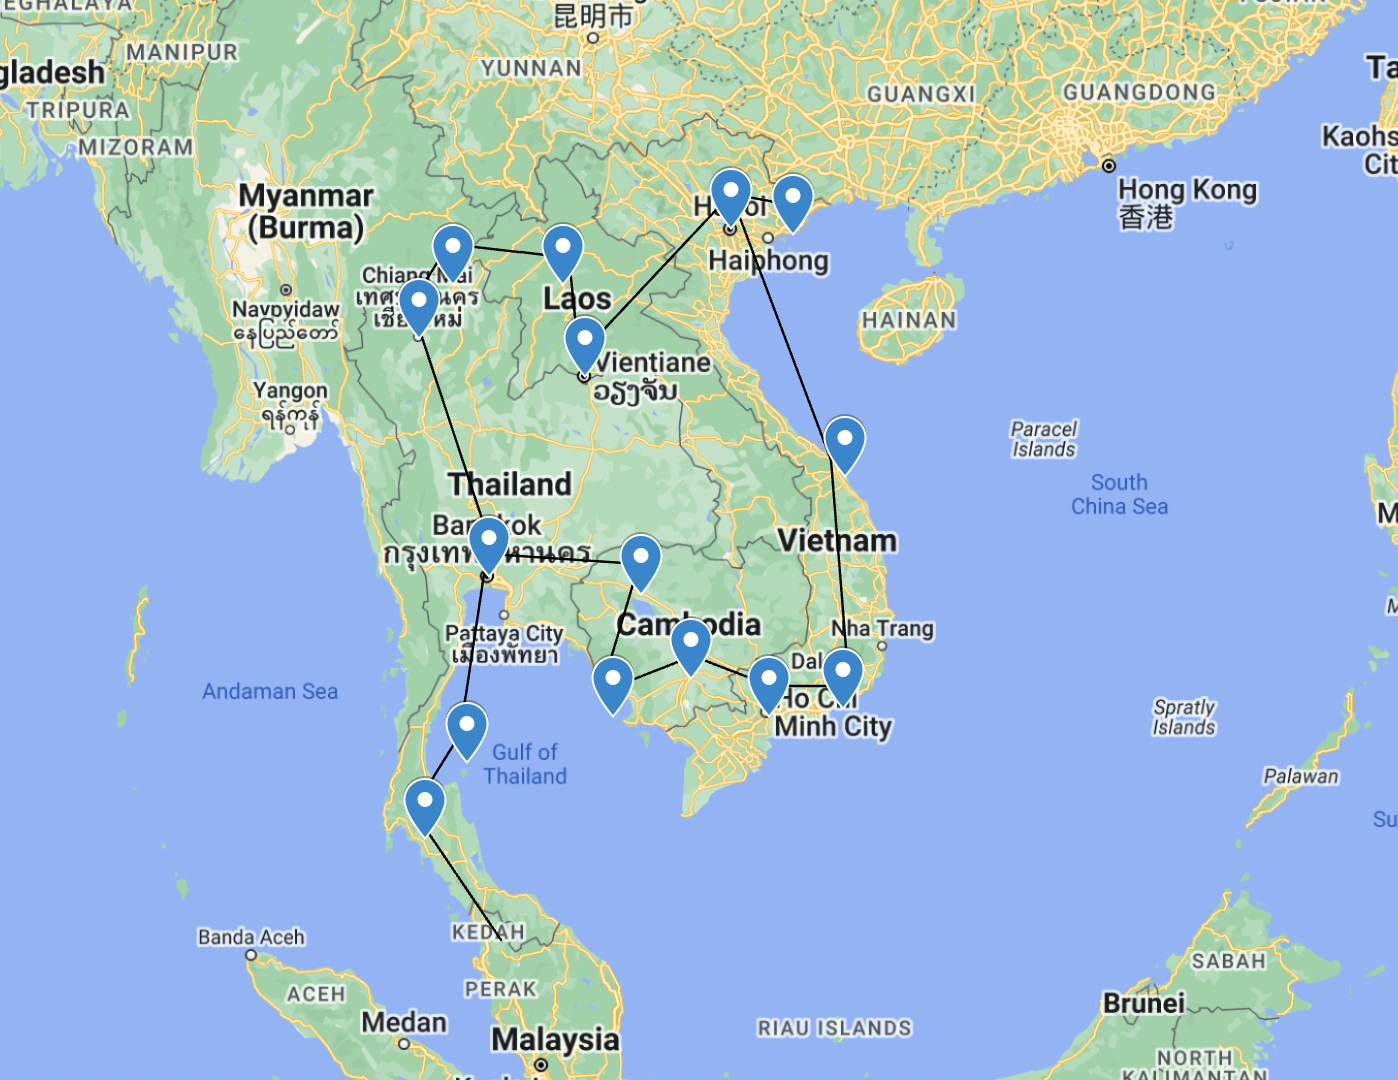 The Banana Pancake Southeast Asia backpacking route on a map.